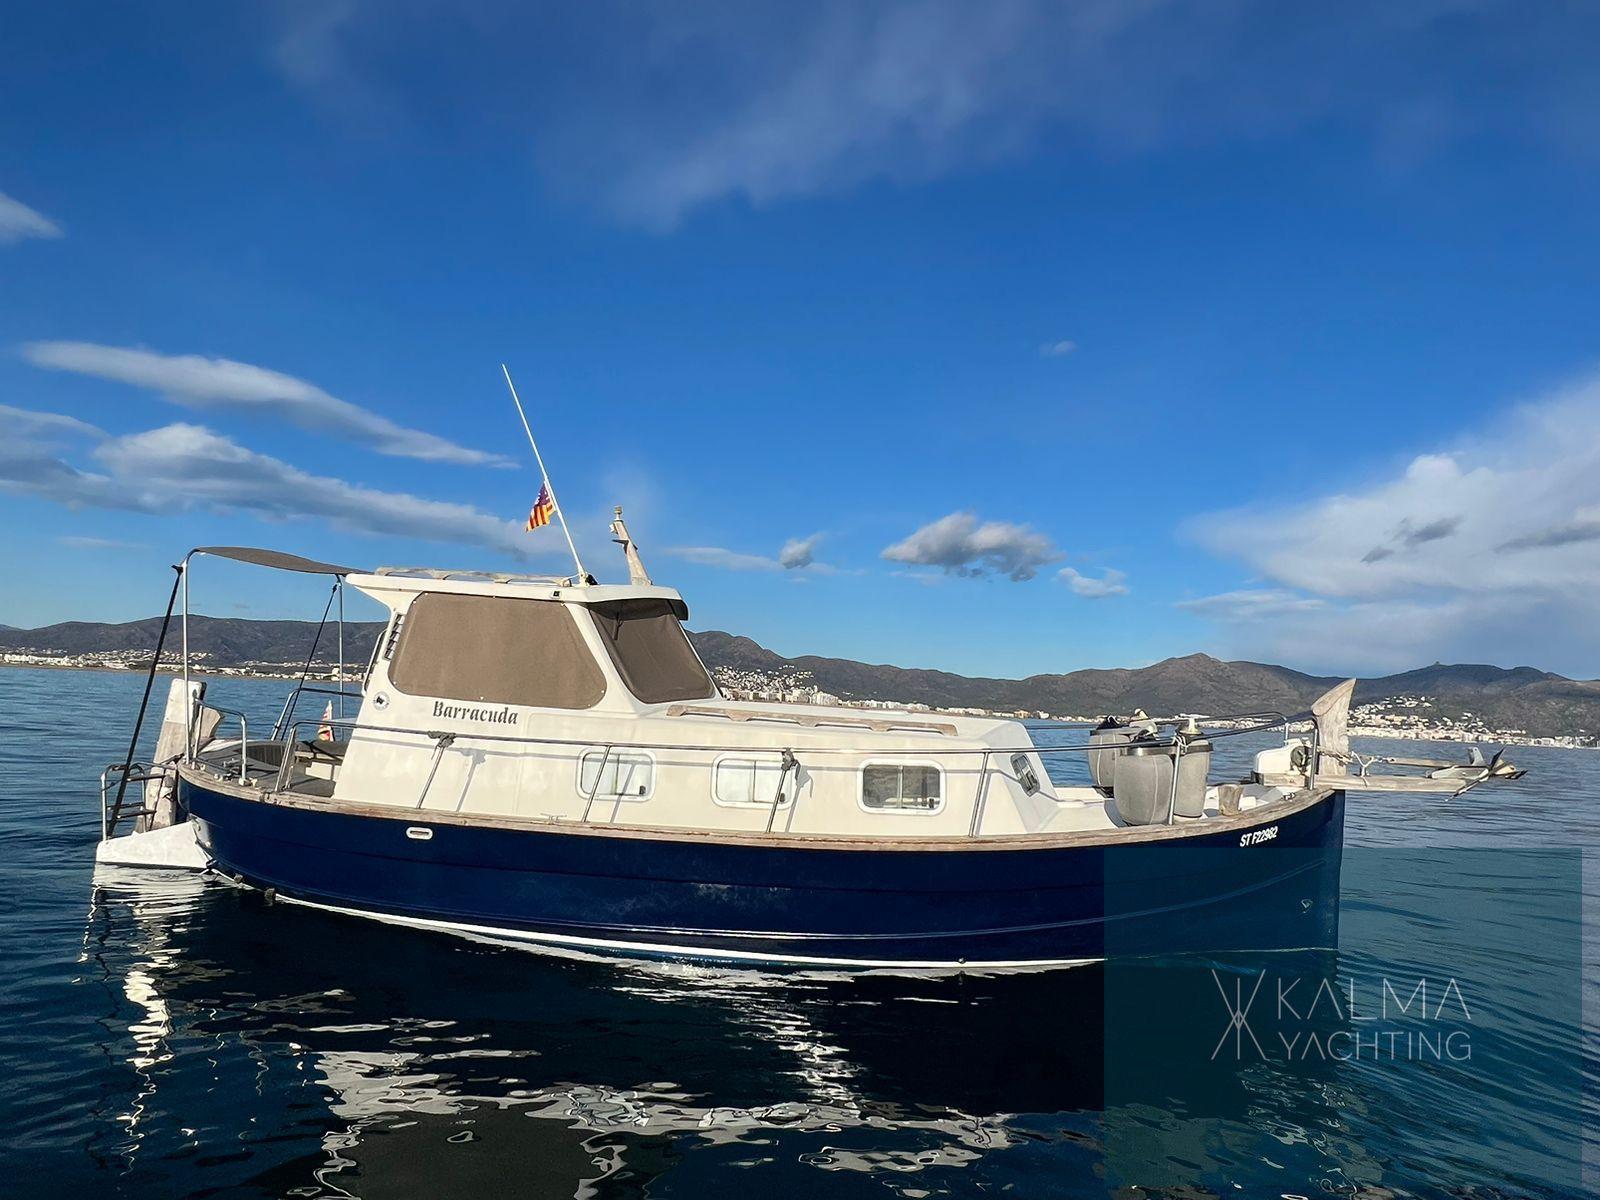 Stylish 80'S Fishing Boat Sant Adria de Besos, Spain — book Botel, 2024  Prices